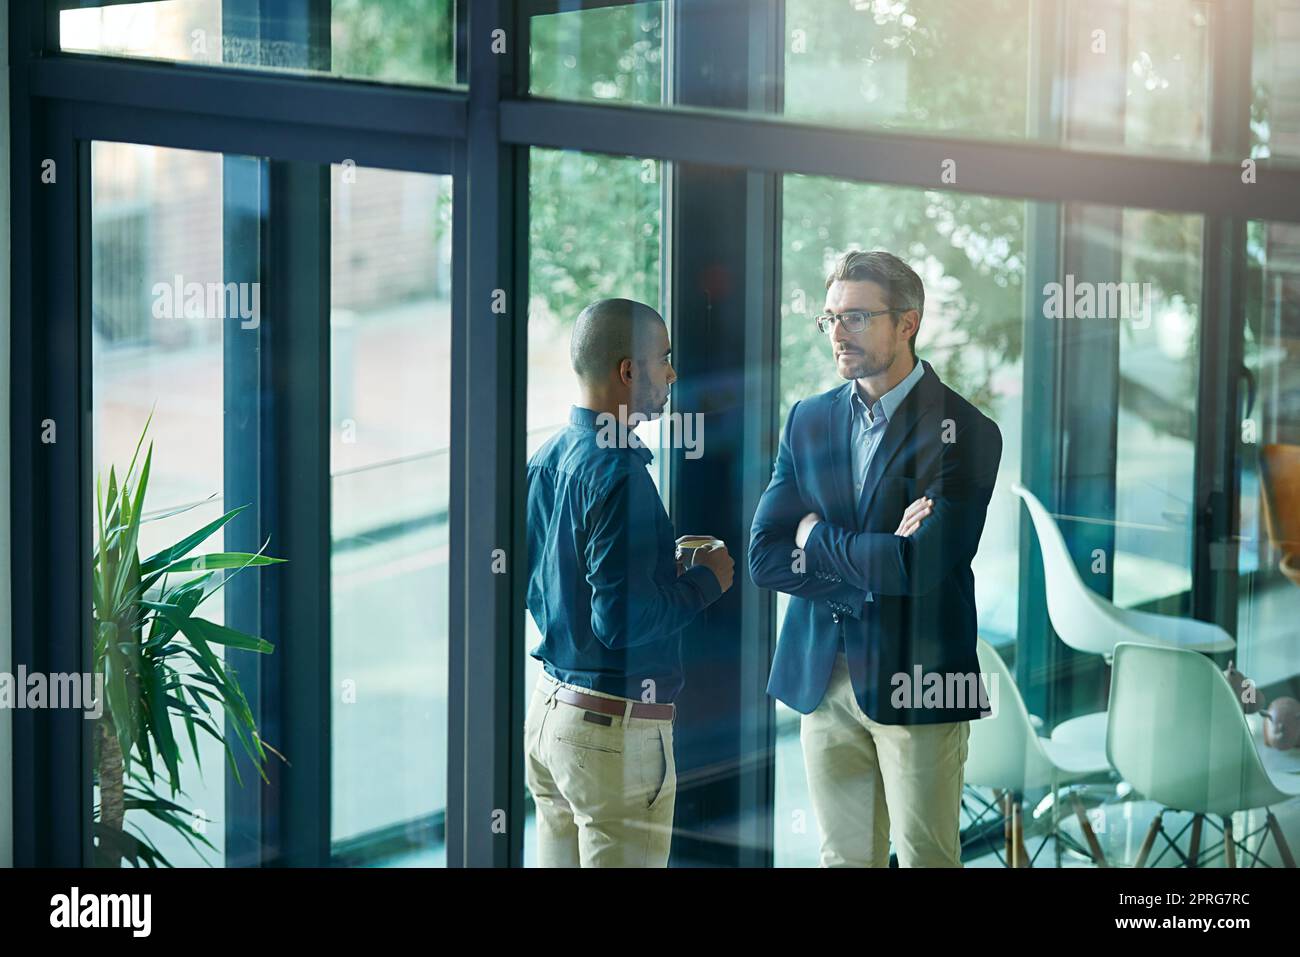 Whats your excuse today. an unimpressed employer listening to an employees excuses. Stock Photo